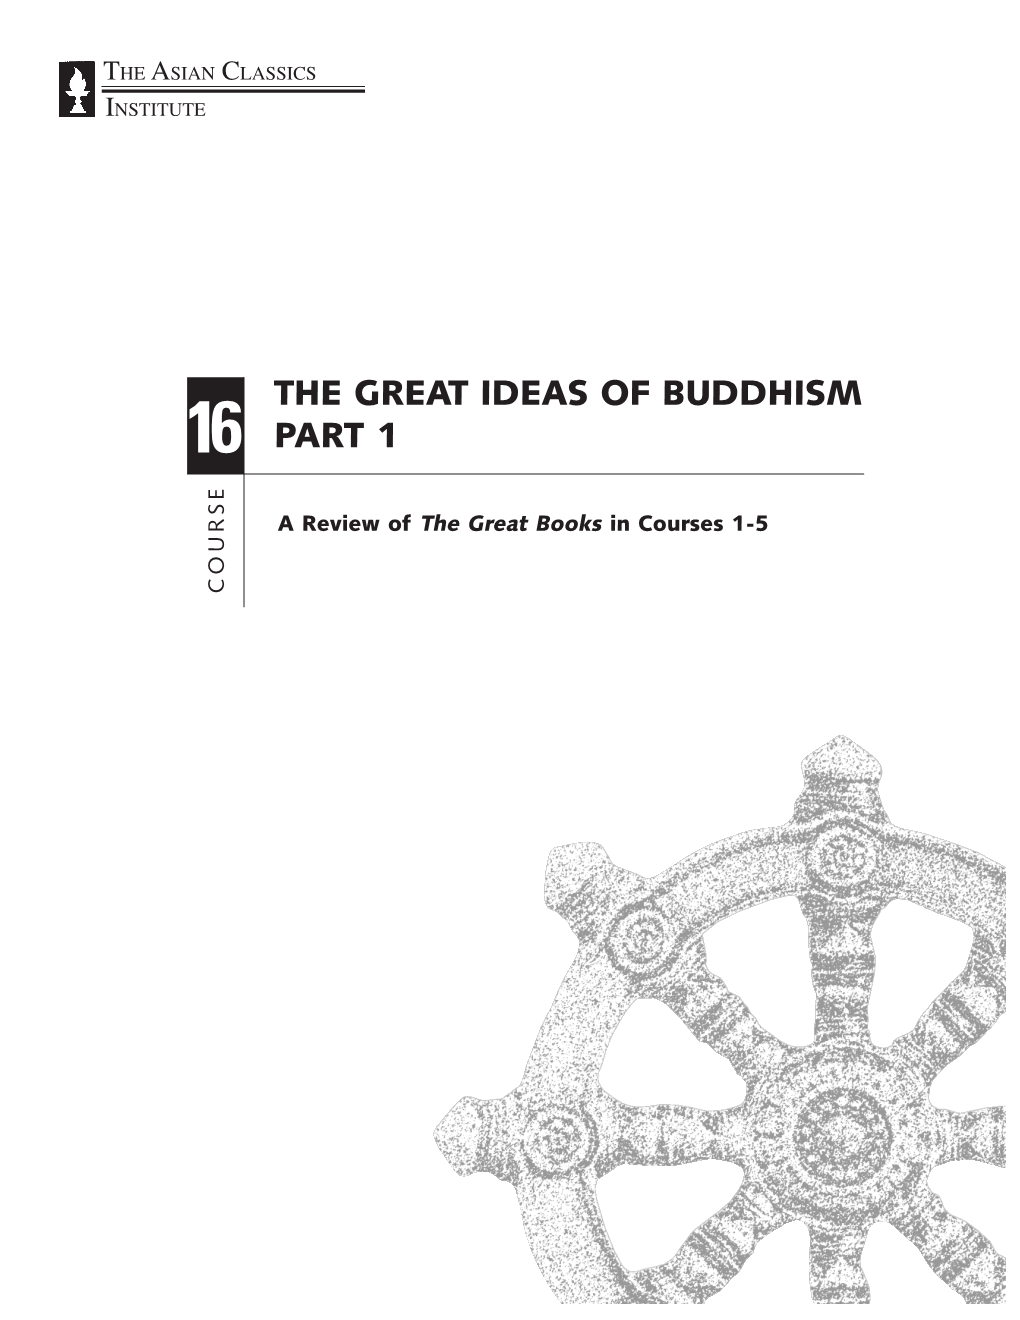 The Great Ideas of Buddhism Part 1